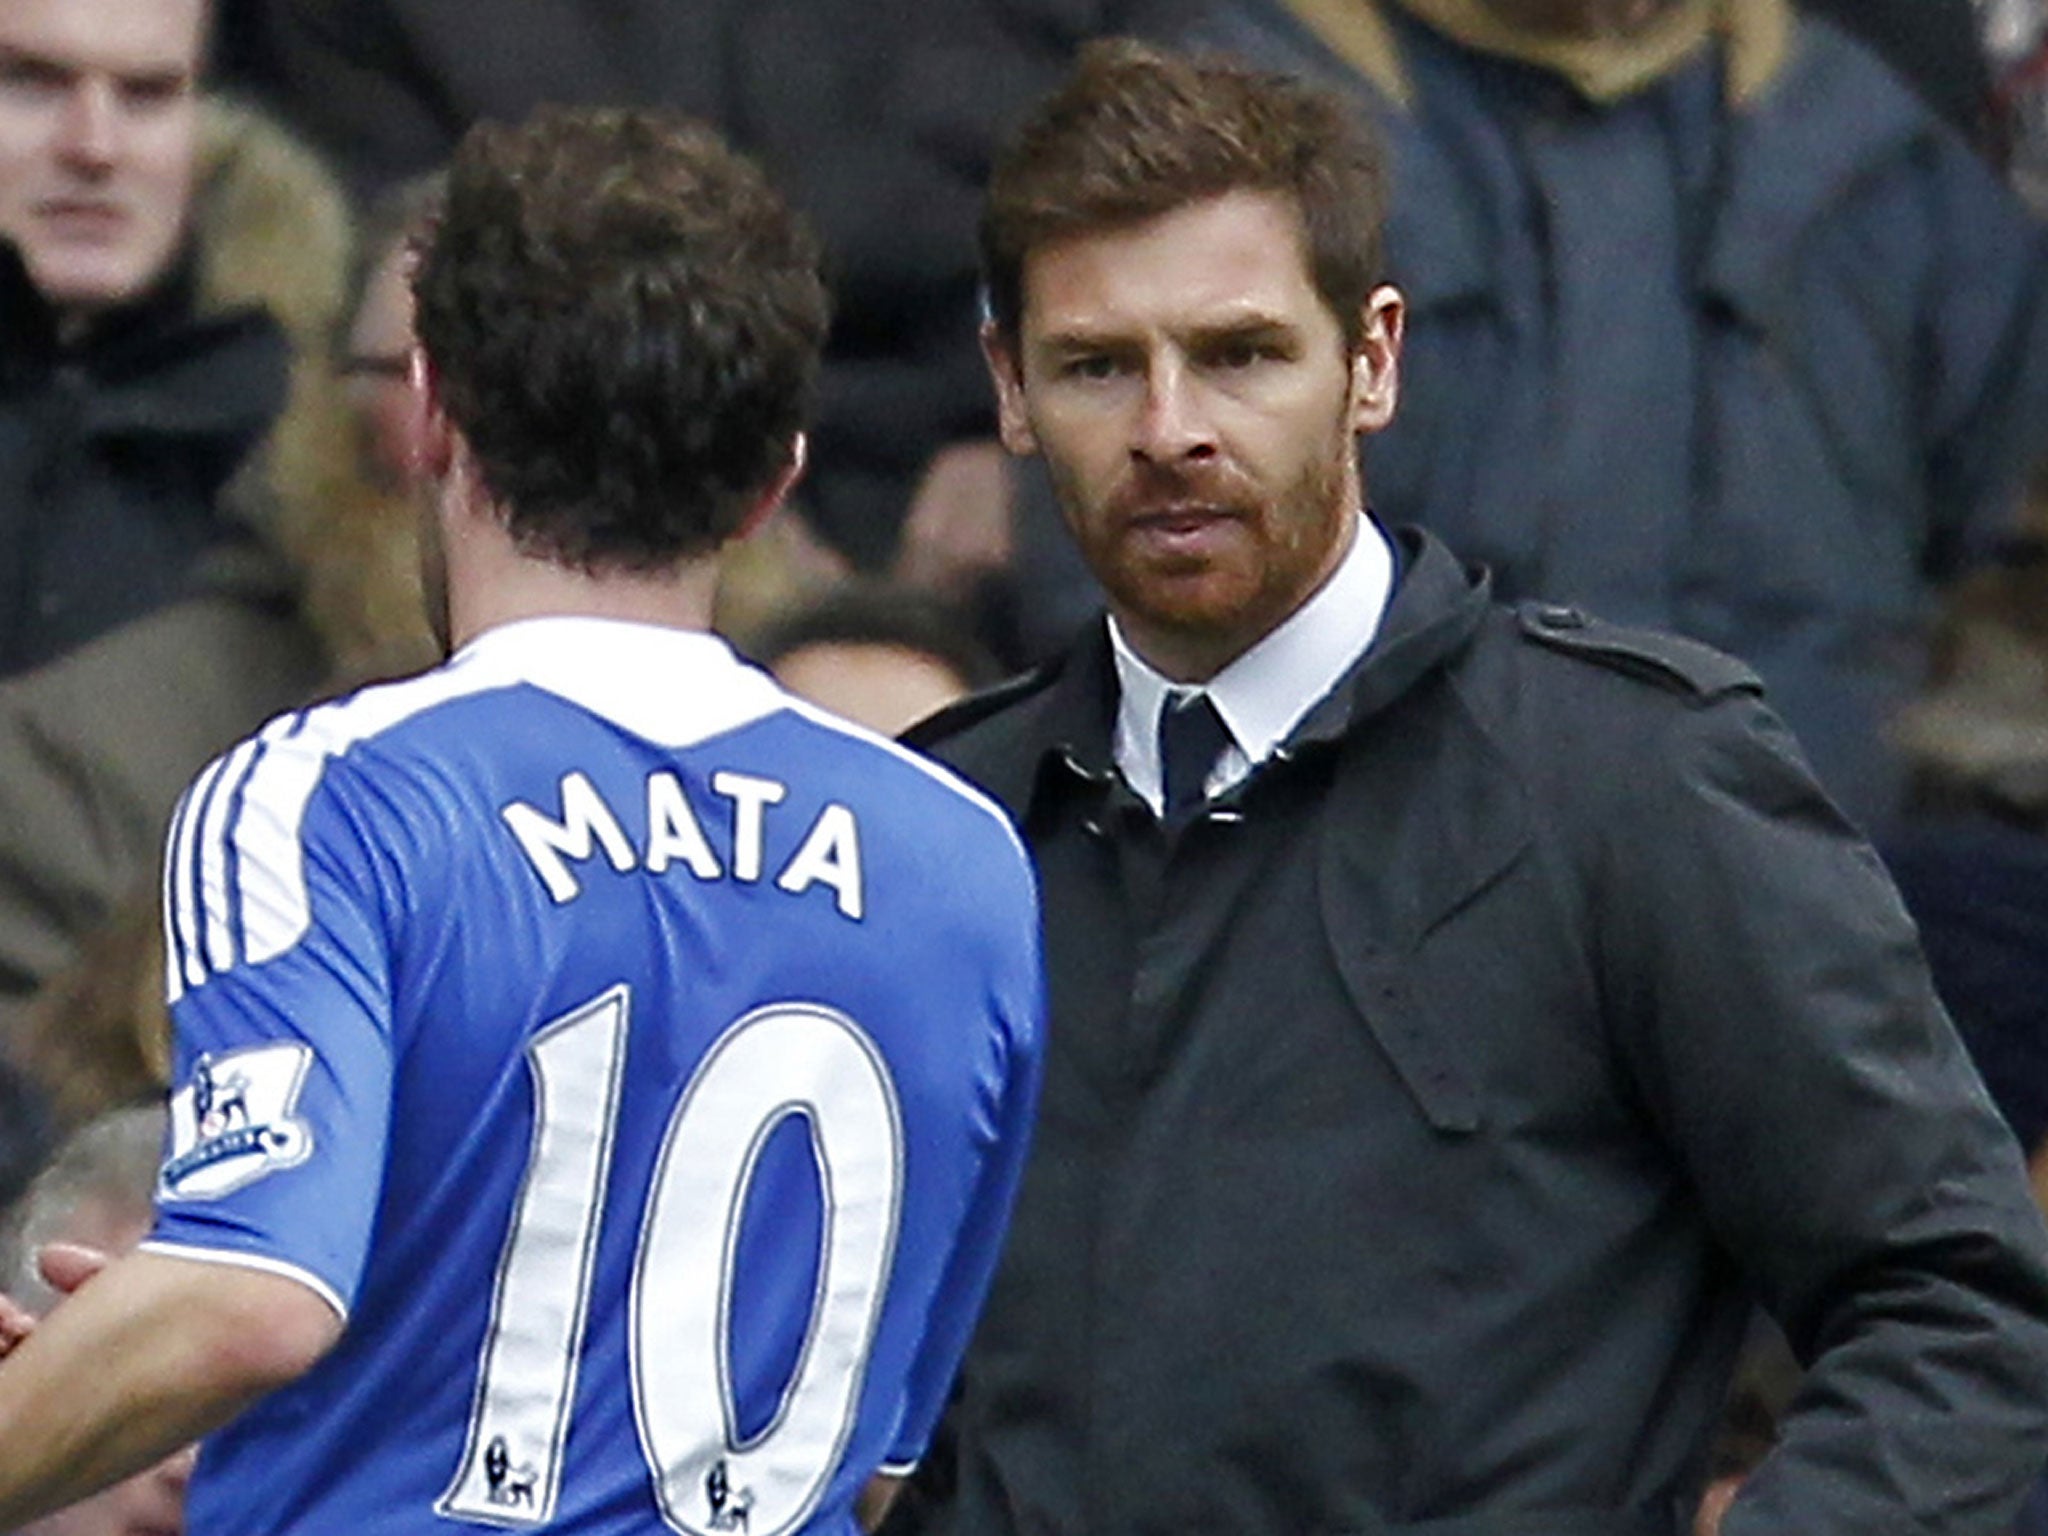 Andre Villas-Boas is reportedly keen on signing Juan Mata for Tottenham